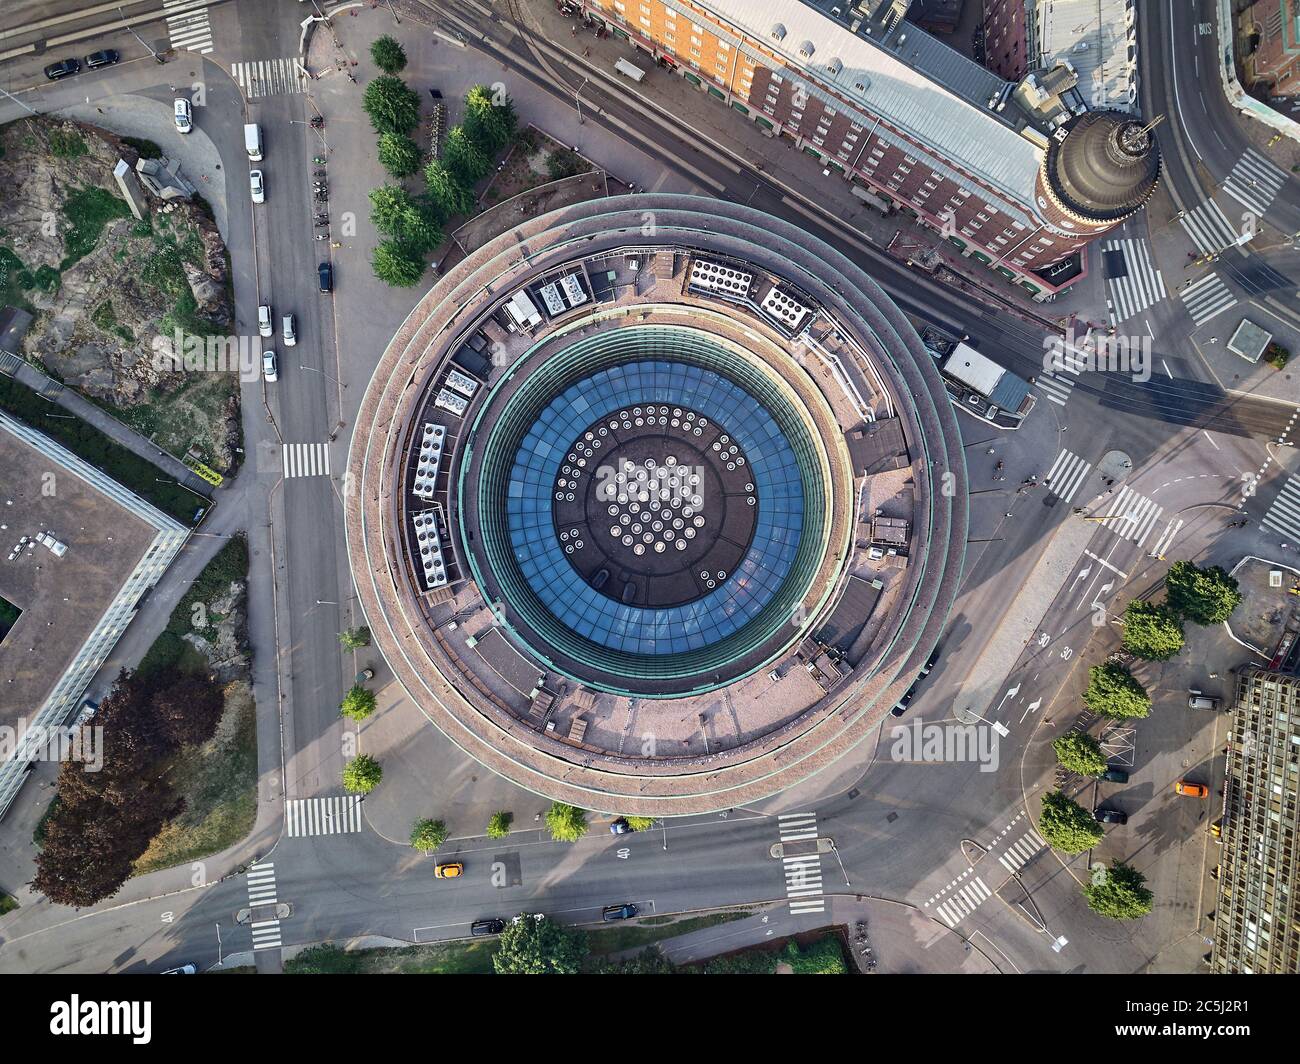 Helsinki / Finland - July 30, 2018: Aerial view of Circle house - Ympyrätalo, is a circle-shaped office building located in the Hakaniemi district. Th Stock Photo